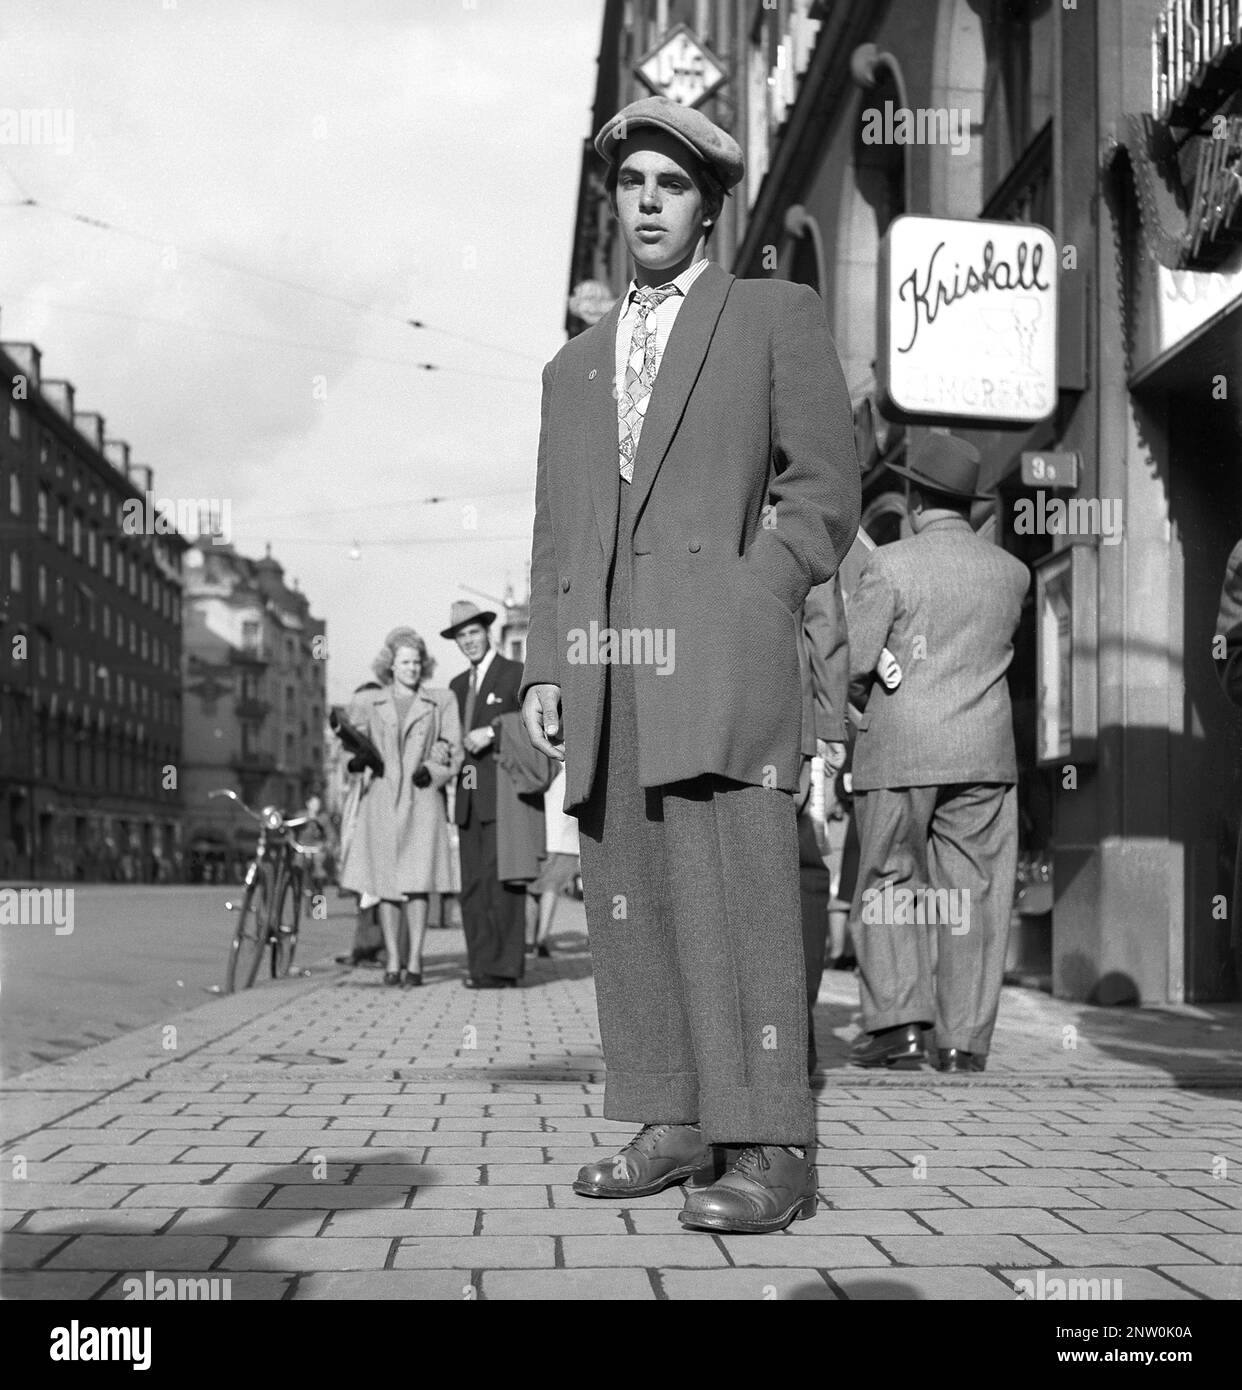 1940s fashion. A young man wearing the typical Zoot suit, a men's suit with high-waisted, wide-legged trousers and a long coat with wide lapels and wide padded shoulders. The zoot suit was controversial in the 1940s. The word Zoot probably comes from a reduplication of suit.  The back side of the zoot suit is seen on picutre KG271200.   Sweden 1944 Kristoffersson Ref K60-2 Stock Photo